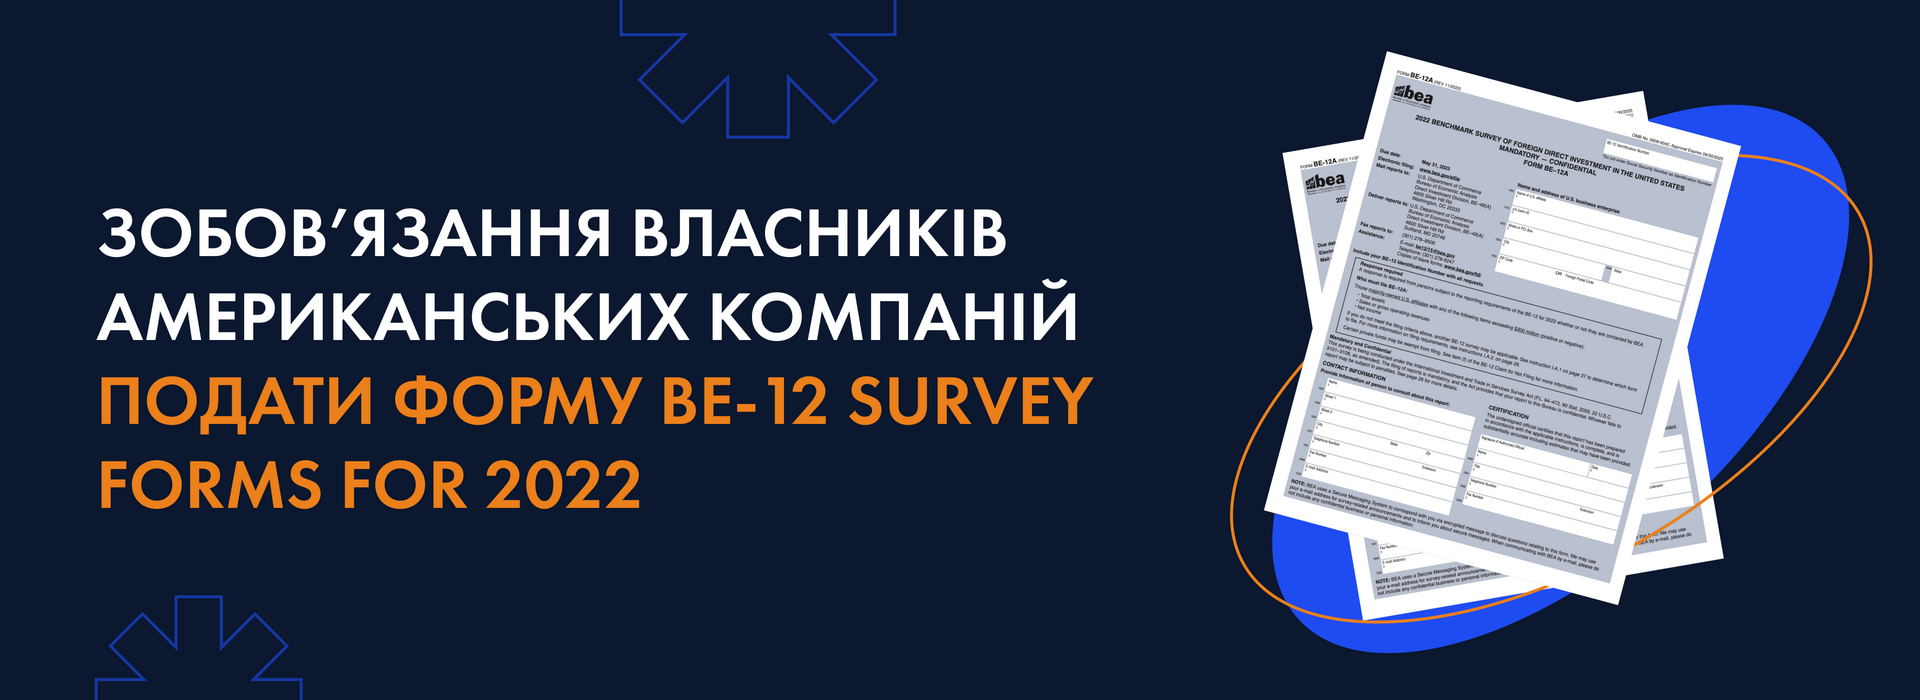 Obligation of US Company Owners to Submit BE-12 Survey Forms for 2022